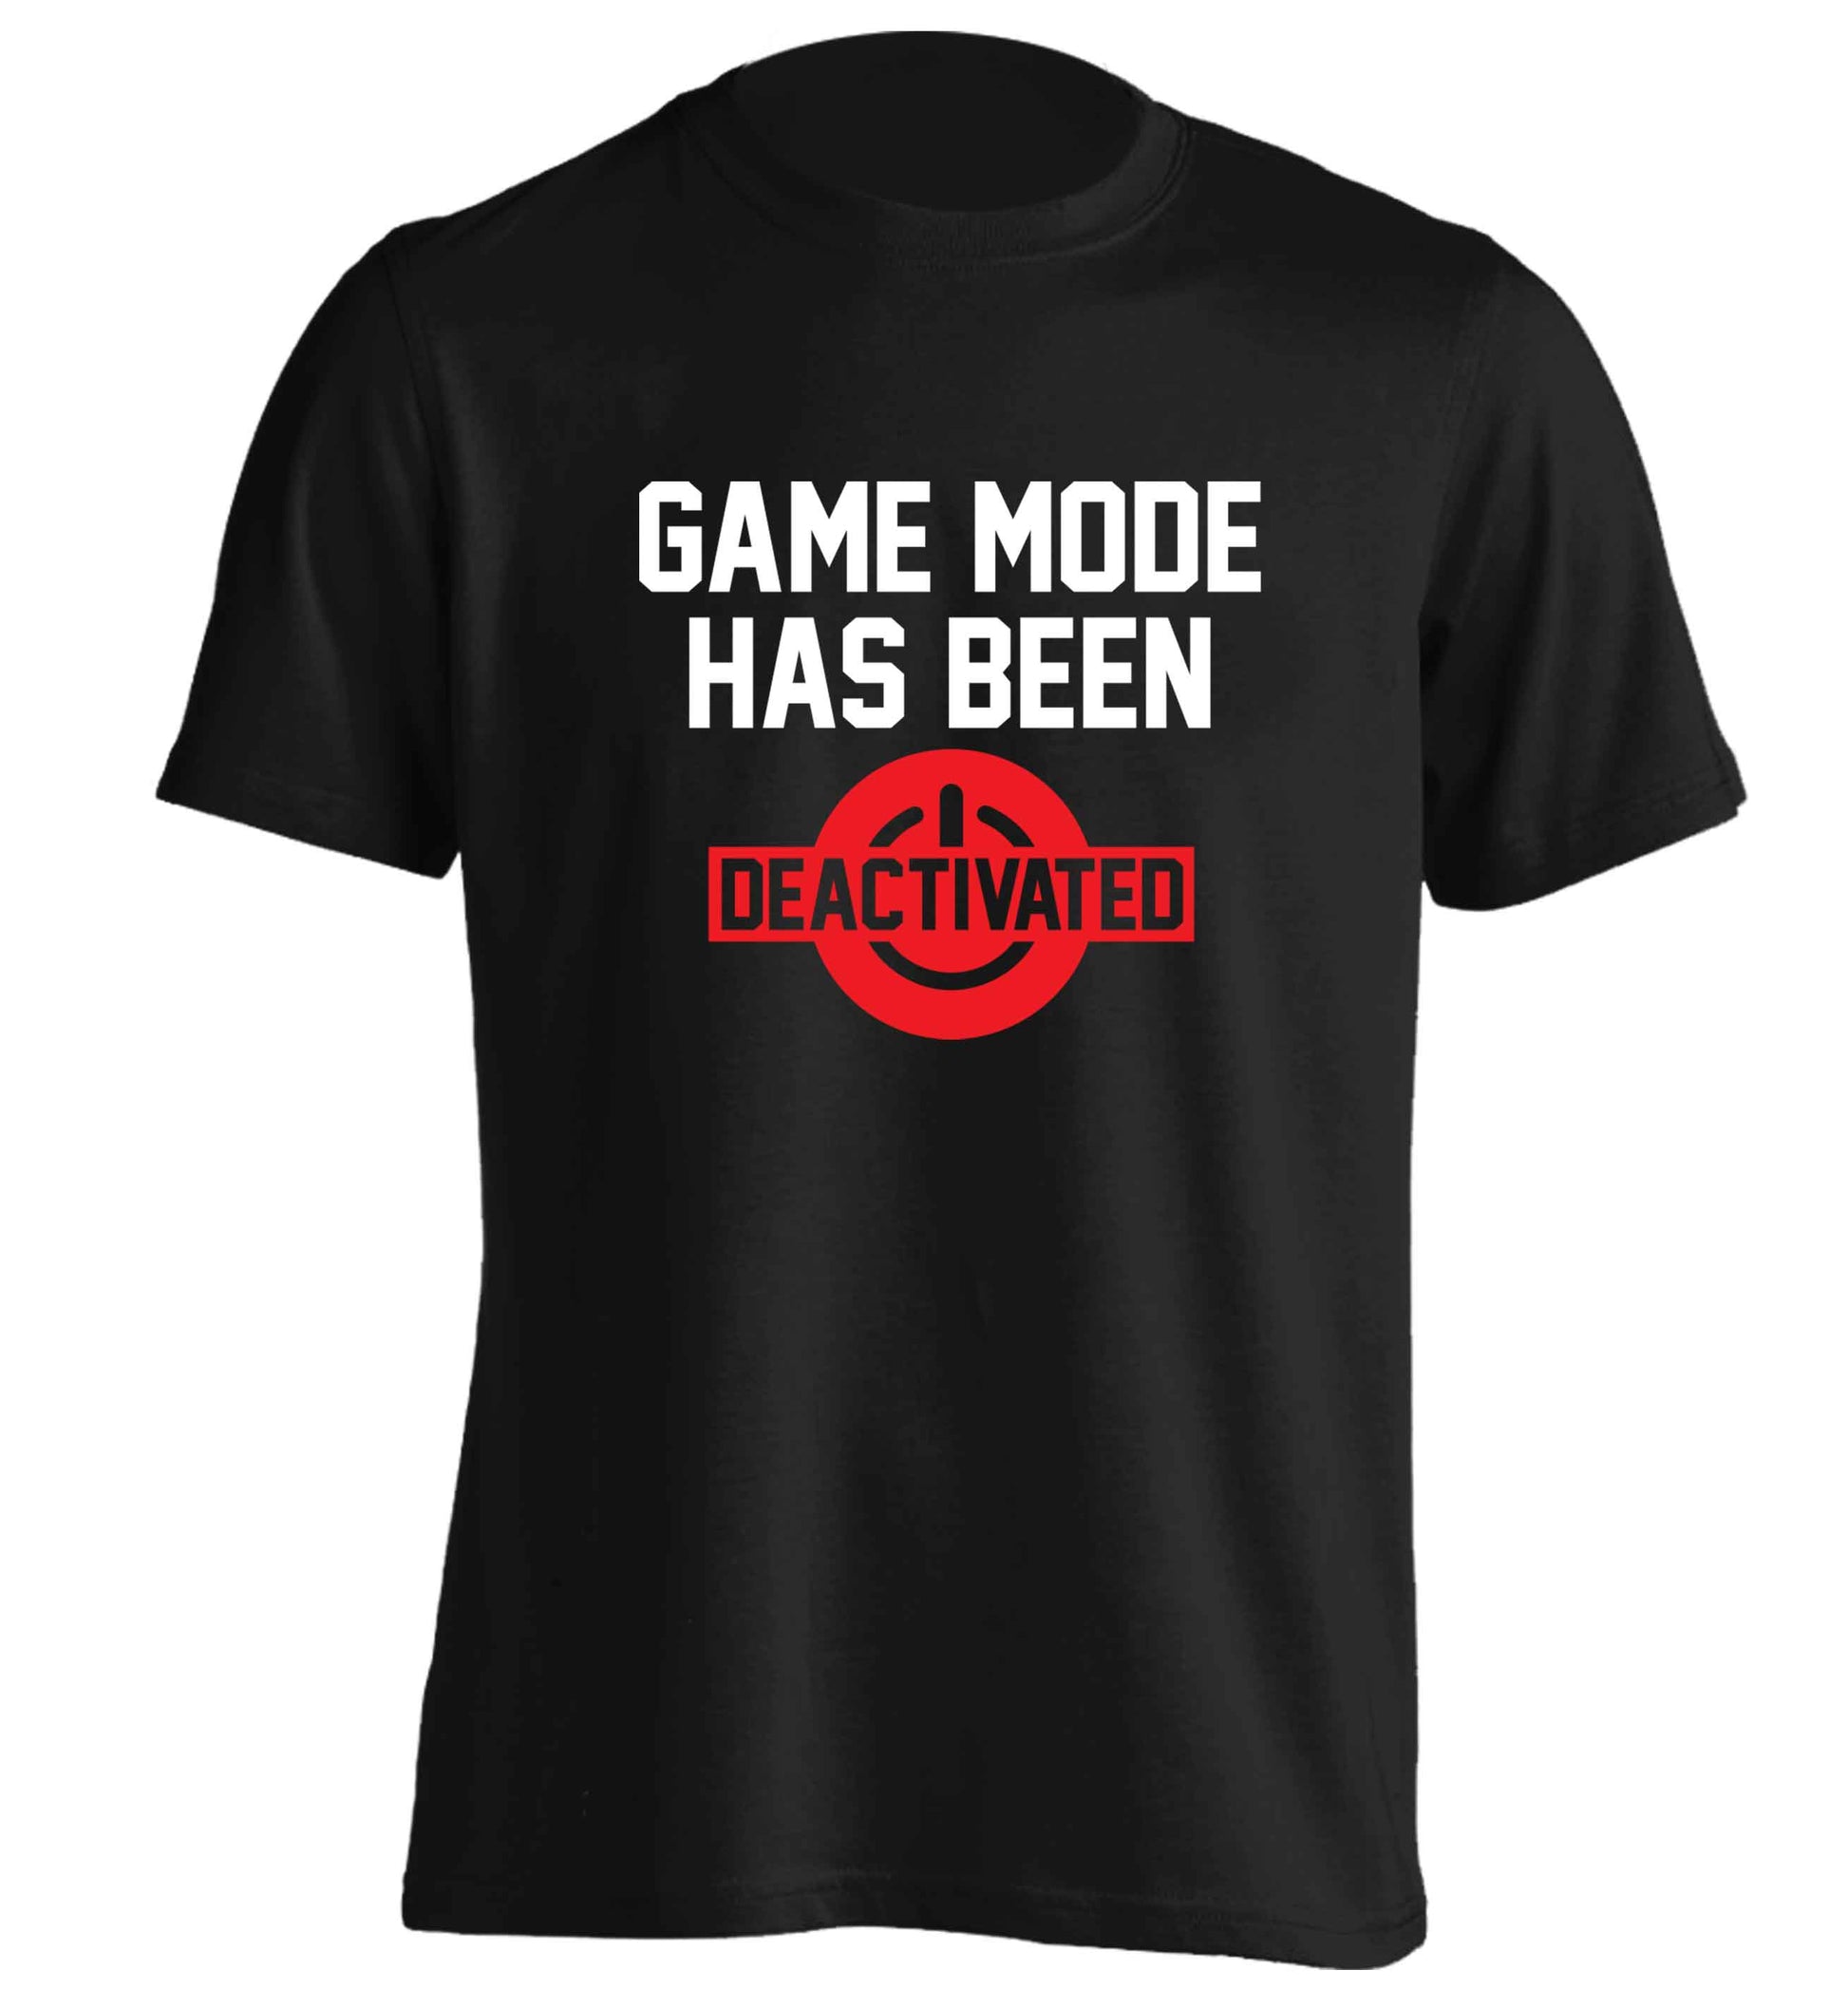 Game Mode Has Been Deactivated adults unisex black Tshirt 2XL